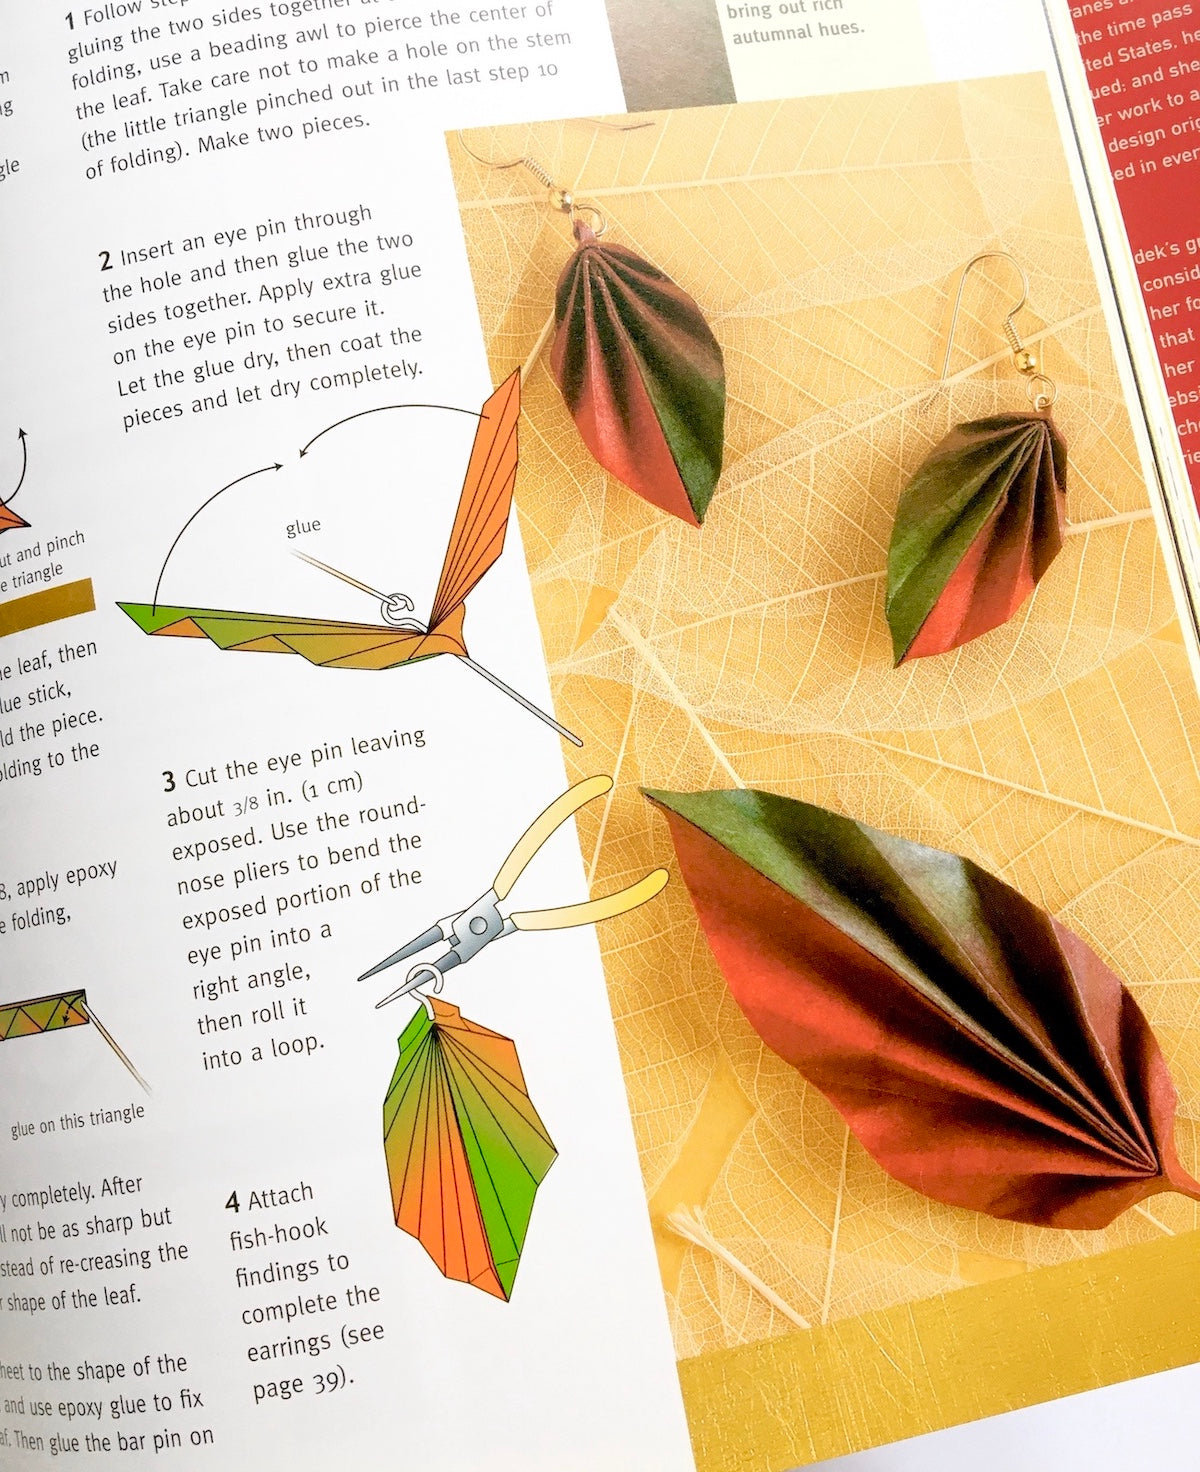 Origami Jewelry: More Than 40 Exquisite Designs to Fold and Wear